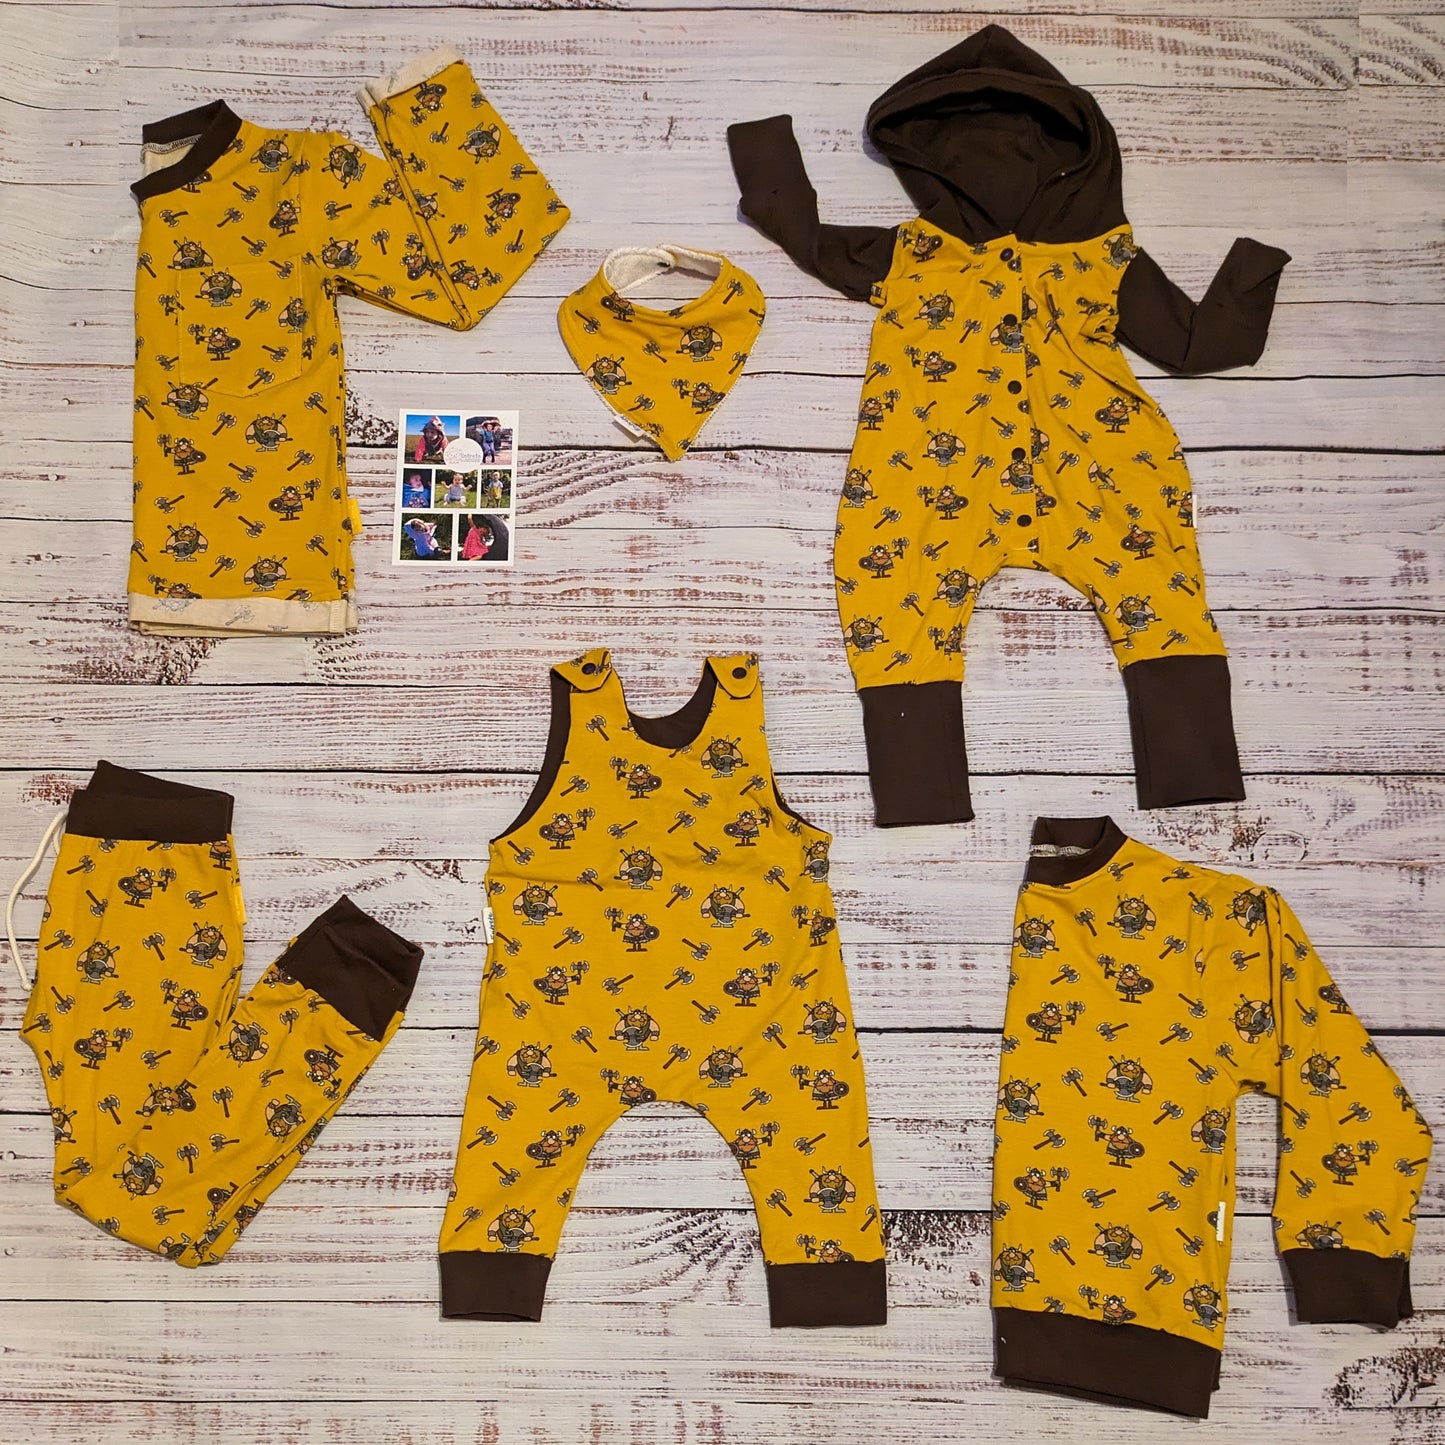 The entire mustard Vikings range, including rompers, harems, sweatshirts and tees.